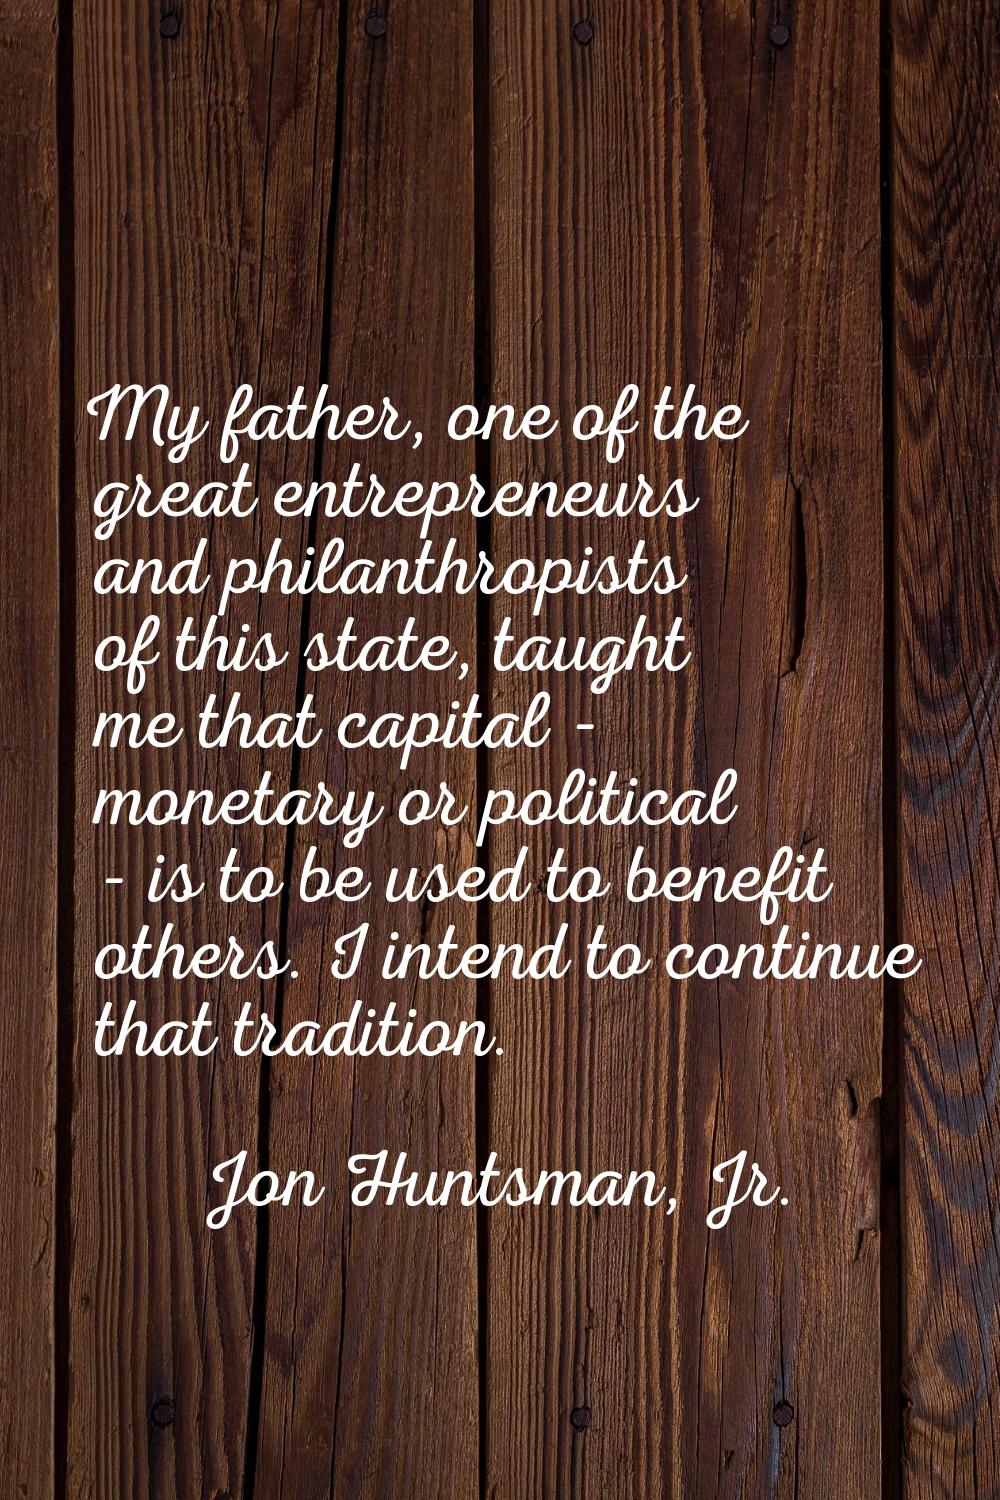 My father, one of the great entrepreneurs and philanthropists of this state, taught me that capital